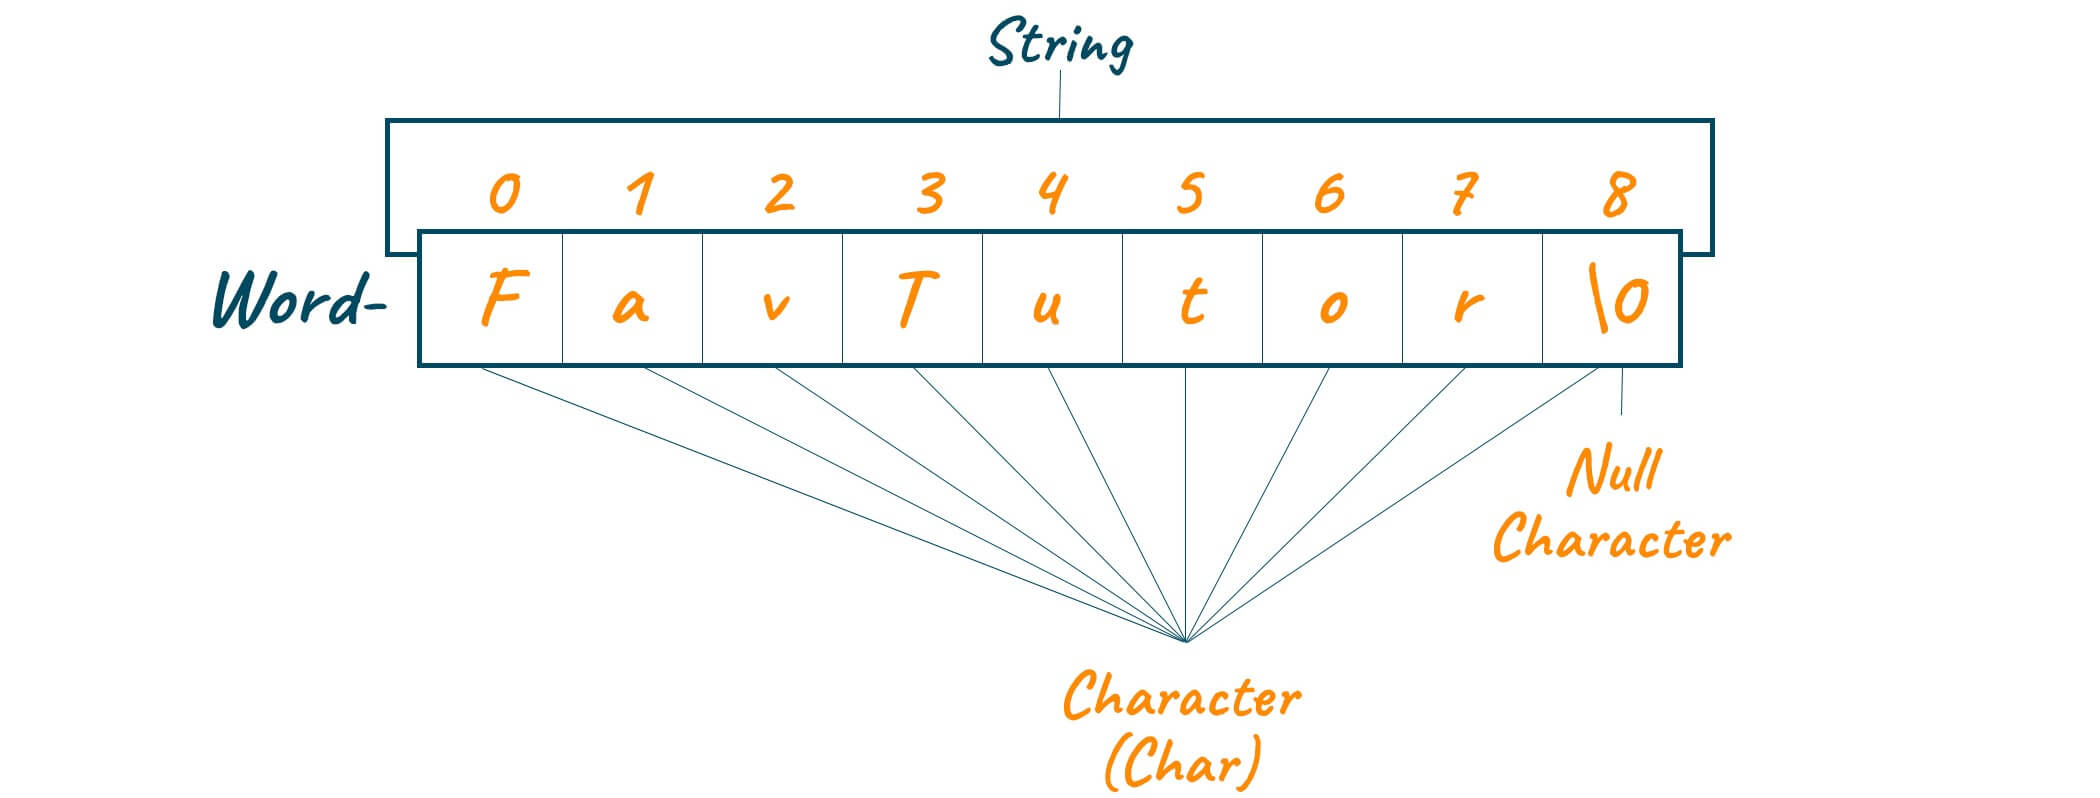 Example of string and character